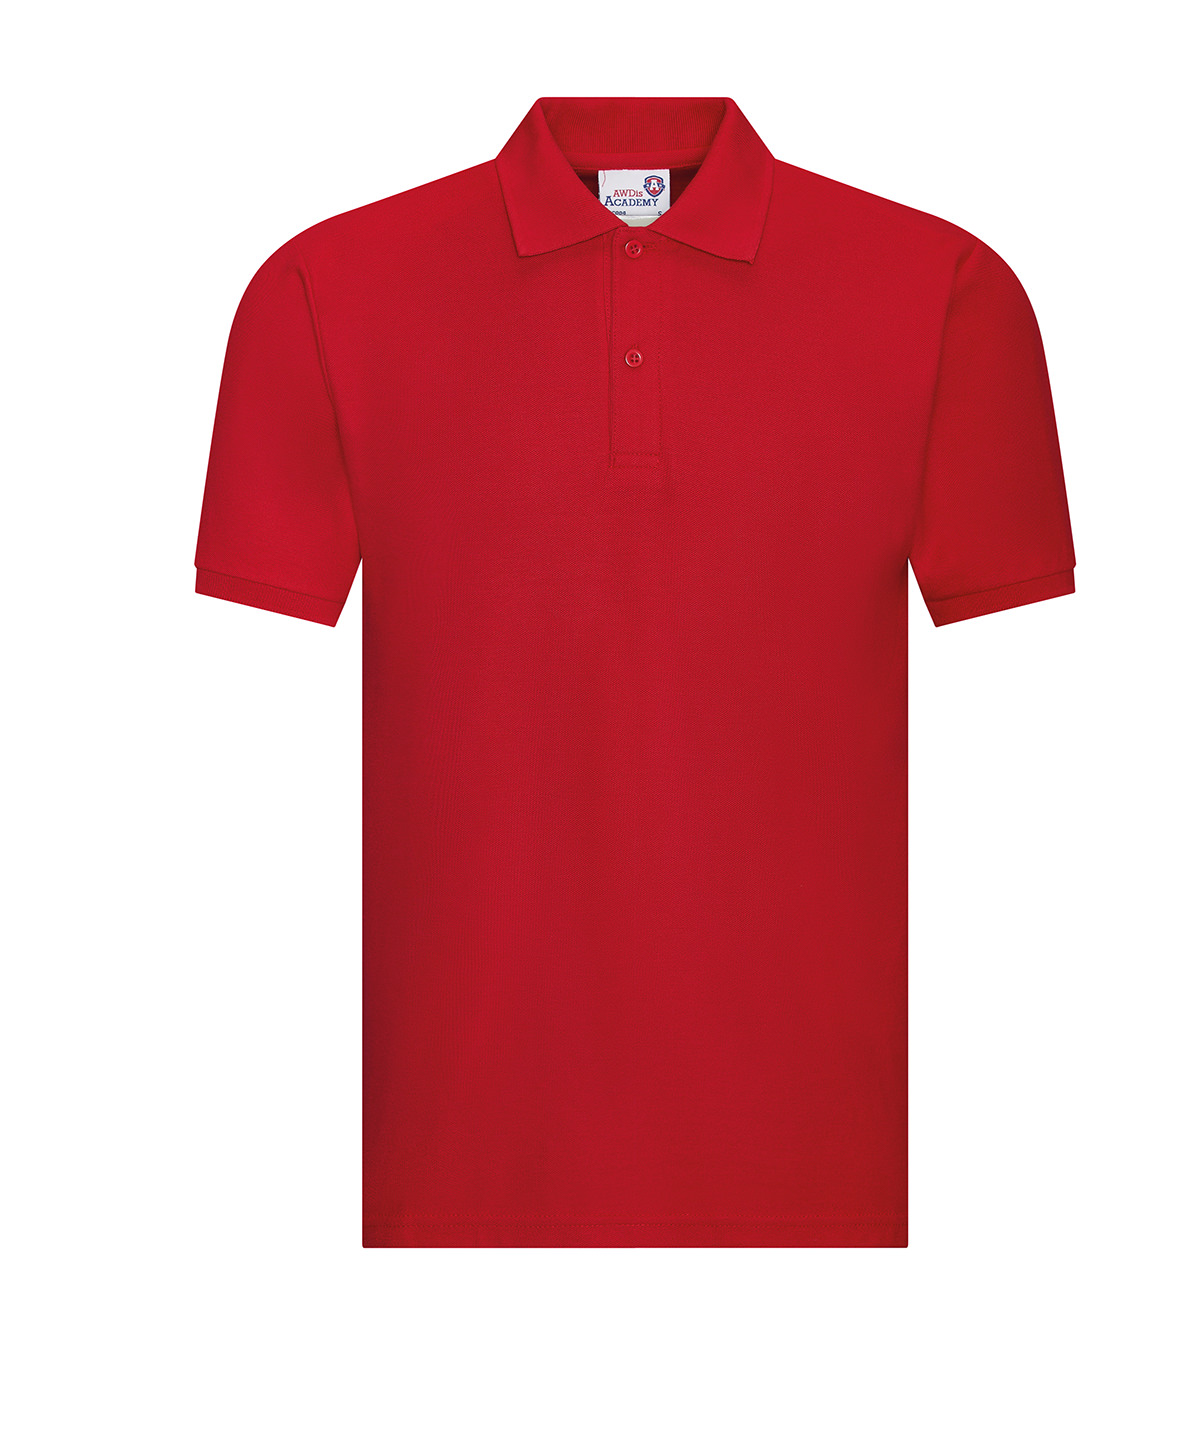 Academy Polo Red Size 2XLarge